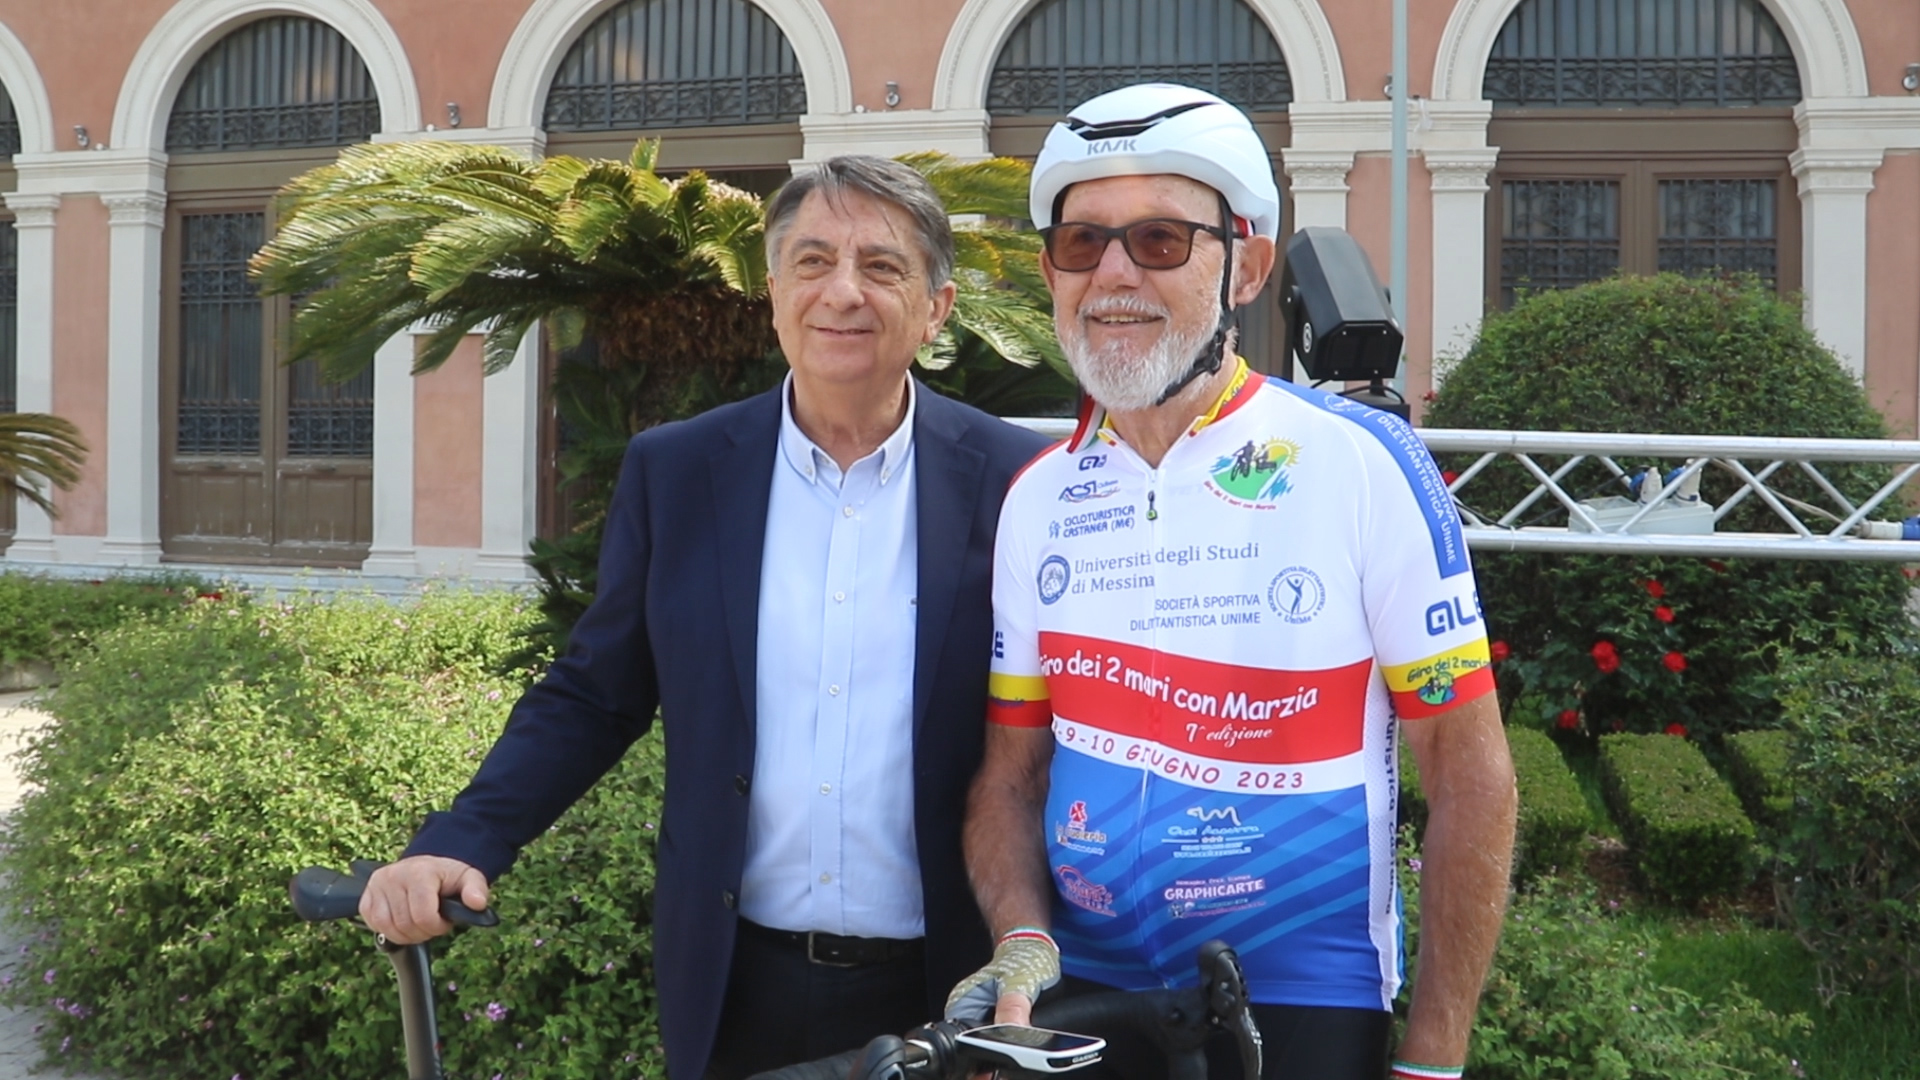 From Australia to Messina: “I’m taking my friends to discover Sicily by bike” Video